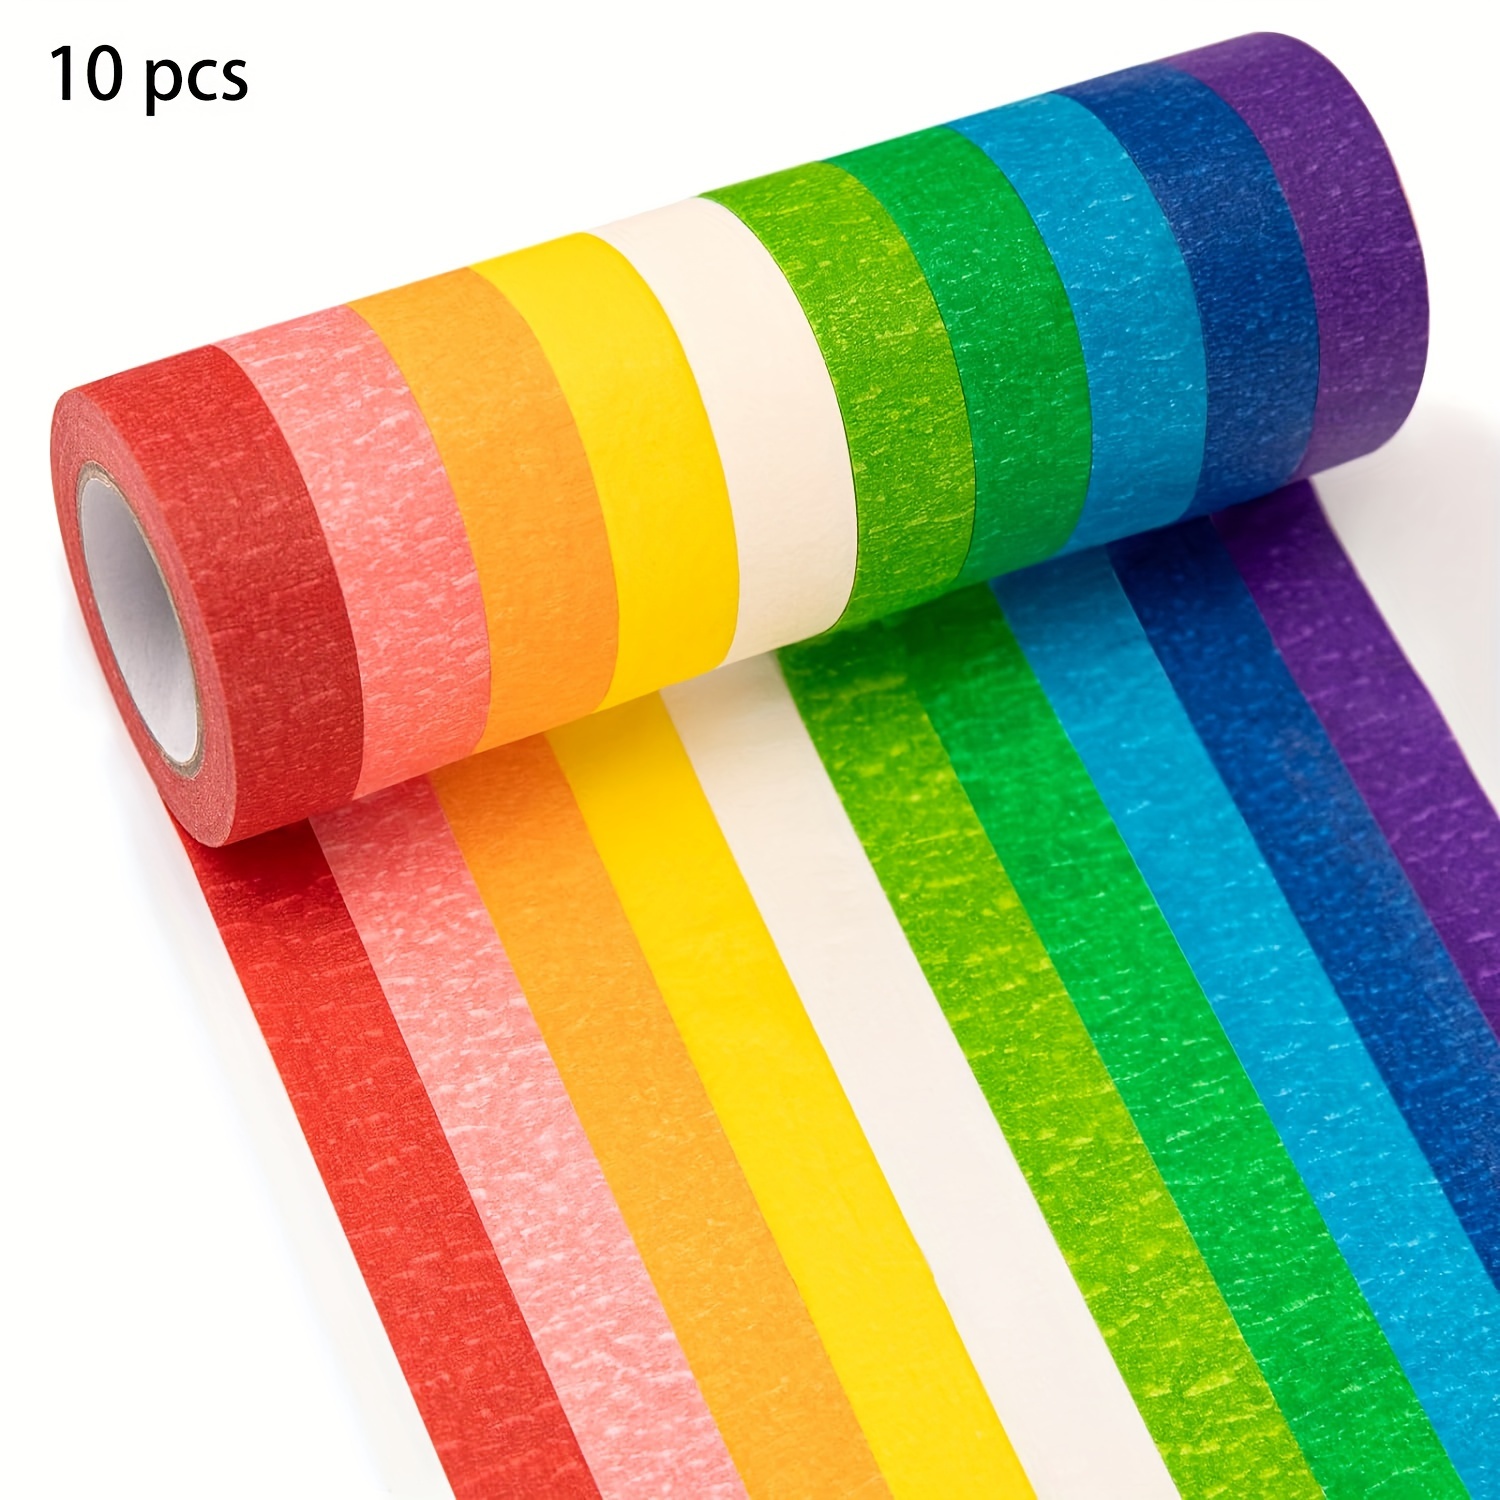  8 Rolls Colored Masking Tape Rainbow Colors Painters Tape  Colorful Craft Art Paper Tape for Kids Labeling Arts Crafts DIY Decorative  Coding Decoration Teaching Supplies, 0.6 Inch x 16 Yard, 8